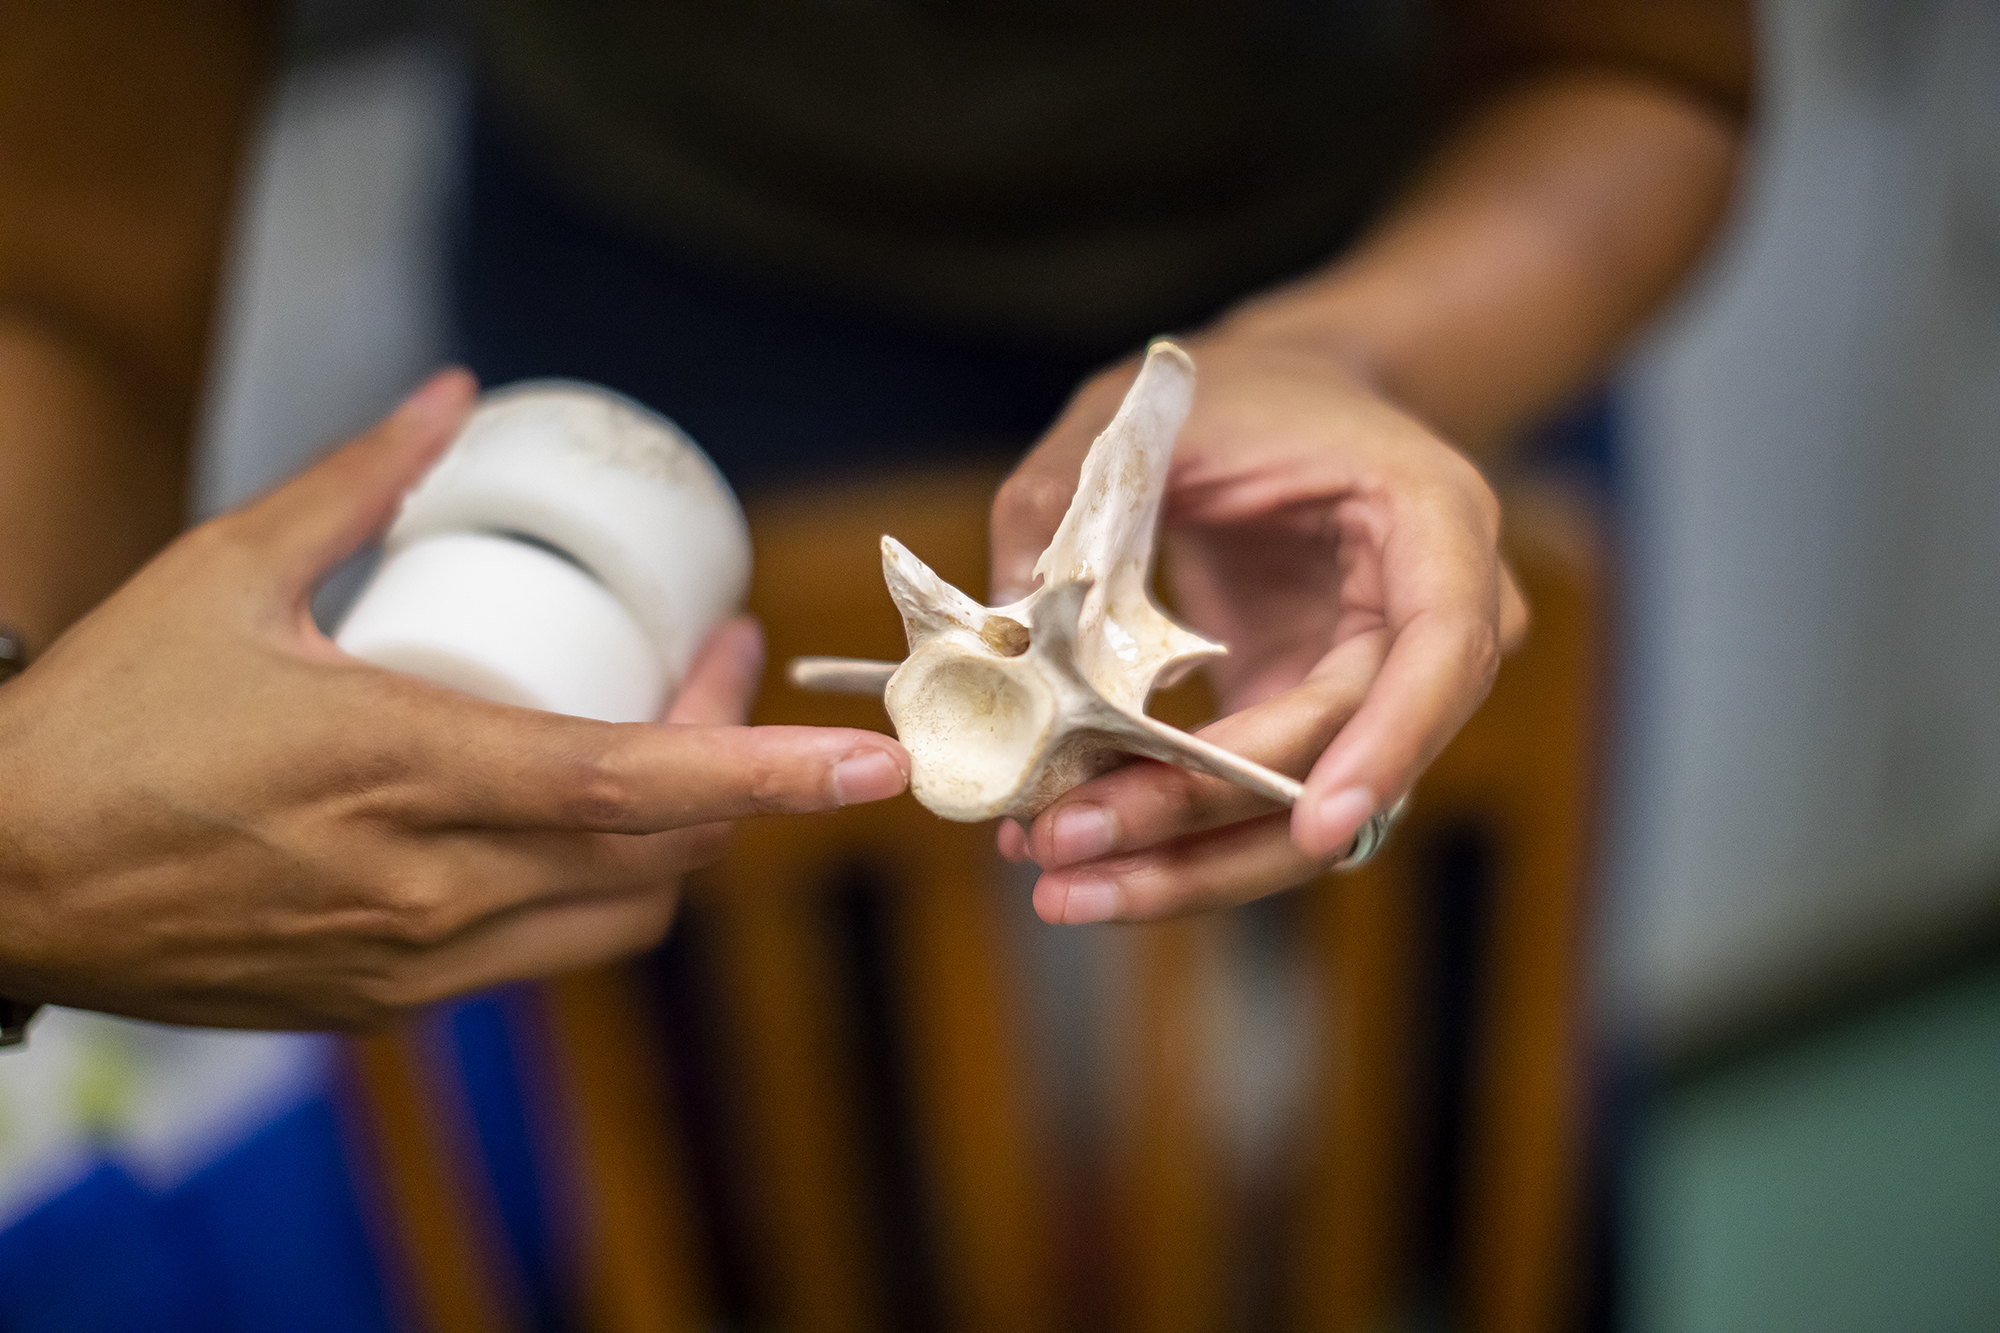 A researcher holds a vertebra in their hand while another points at its features